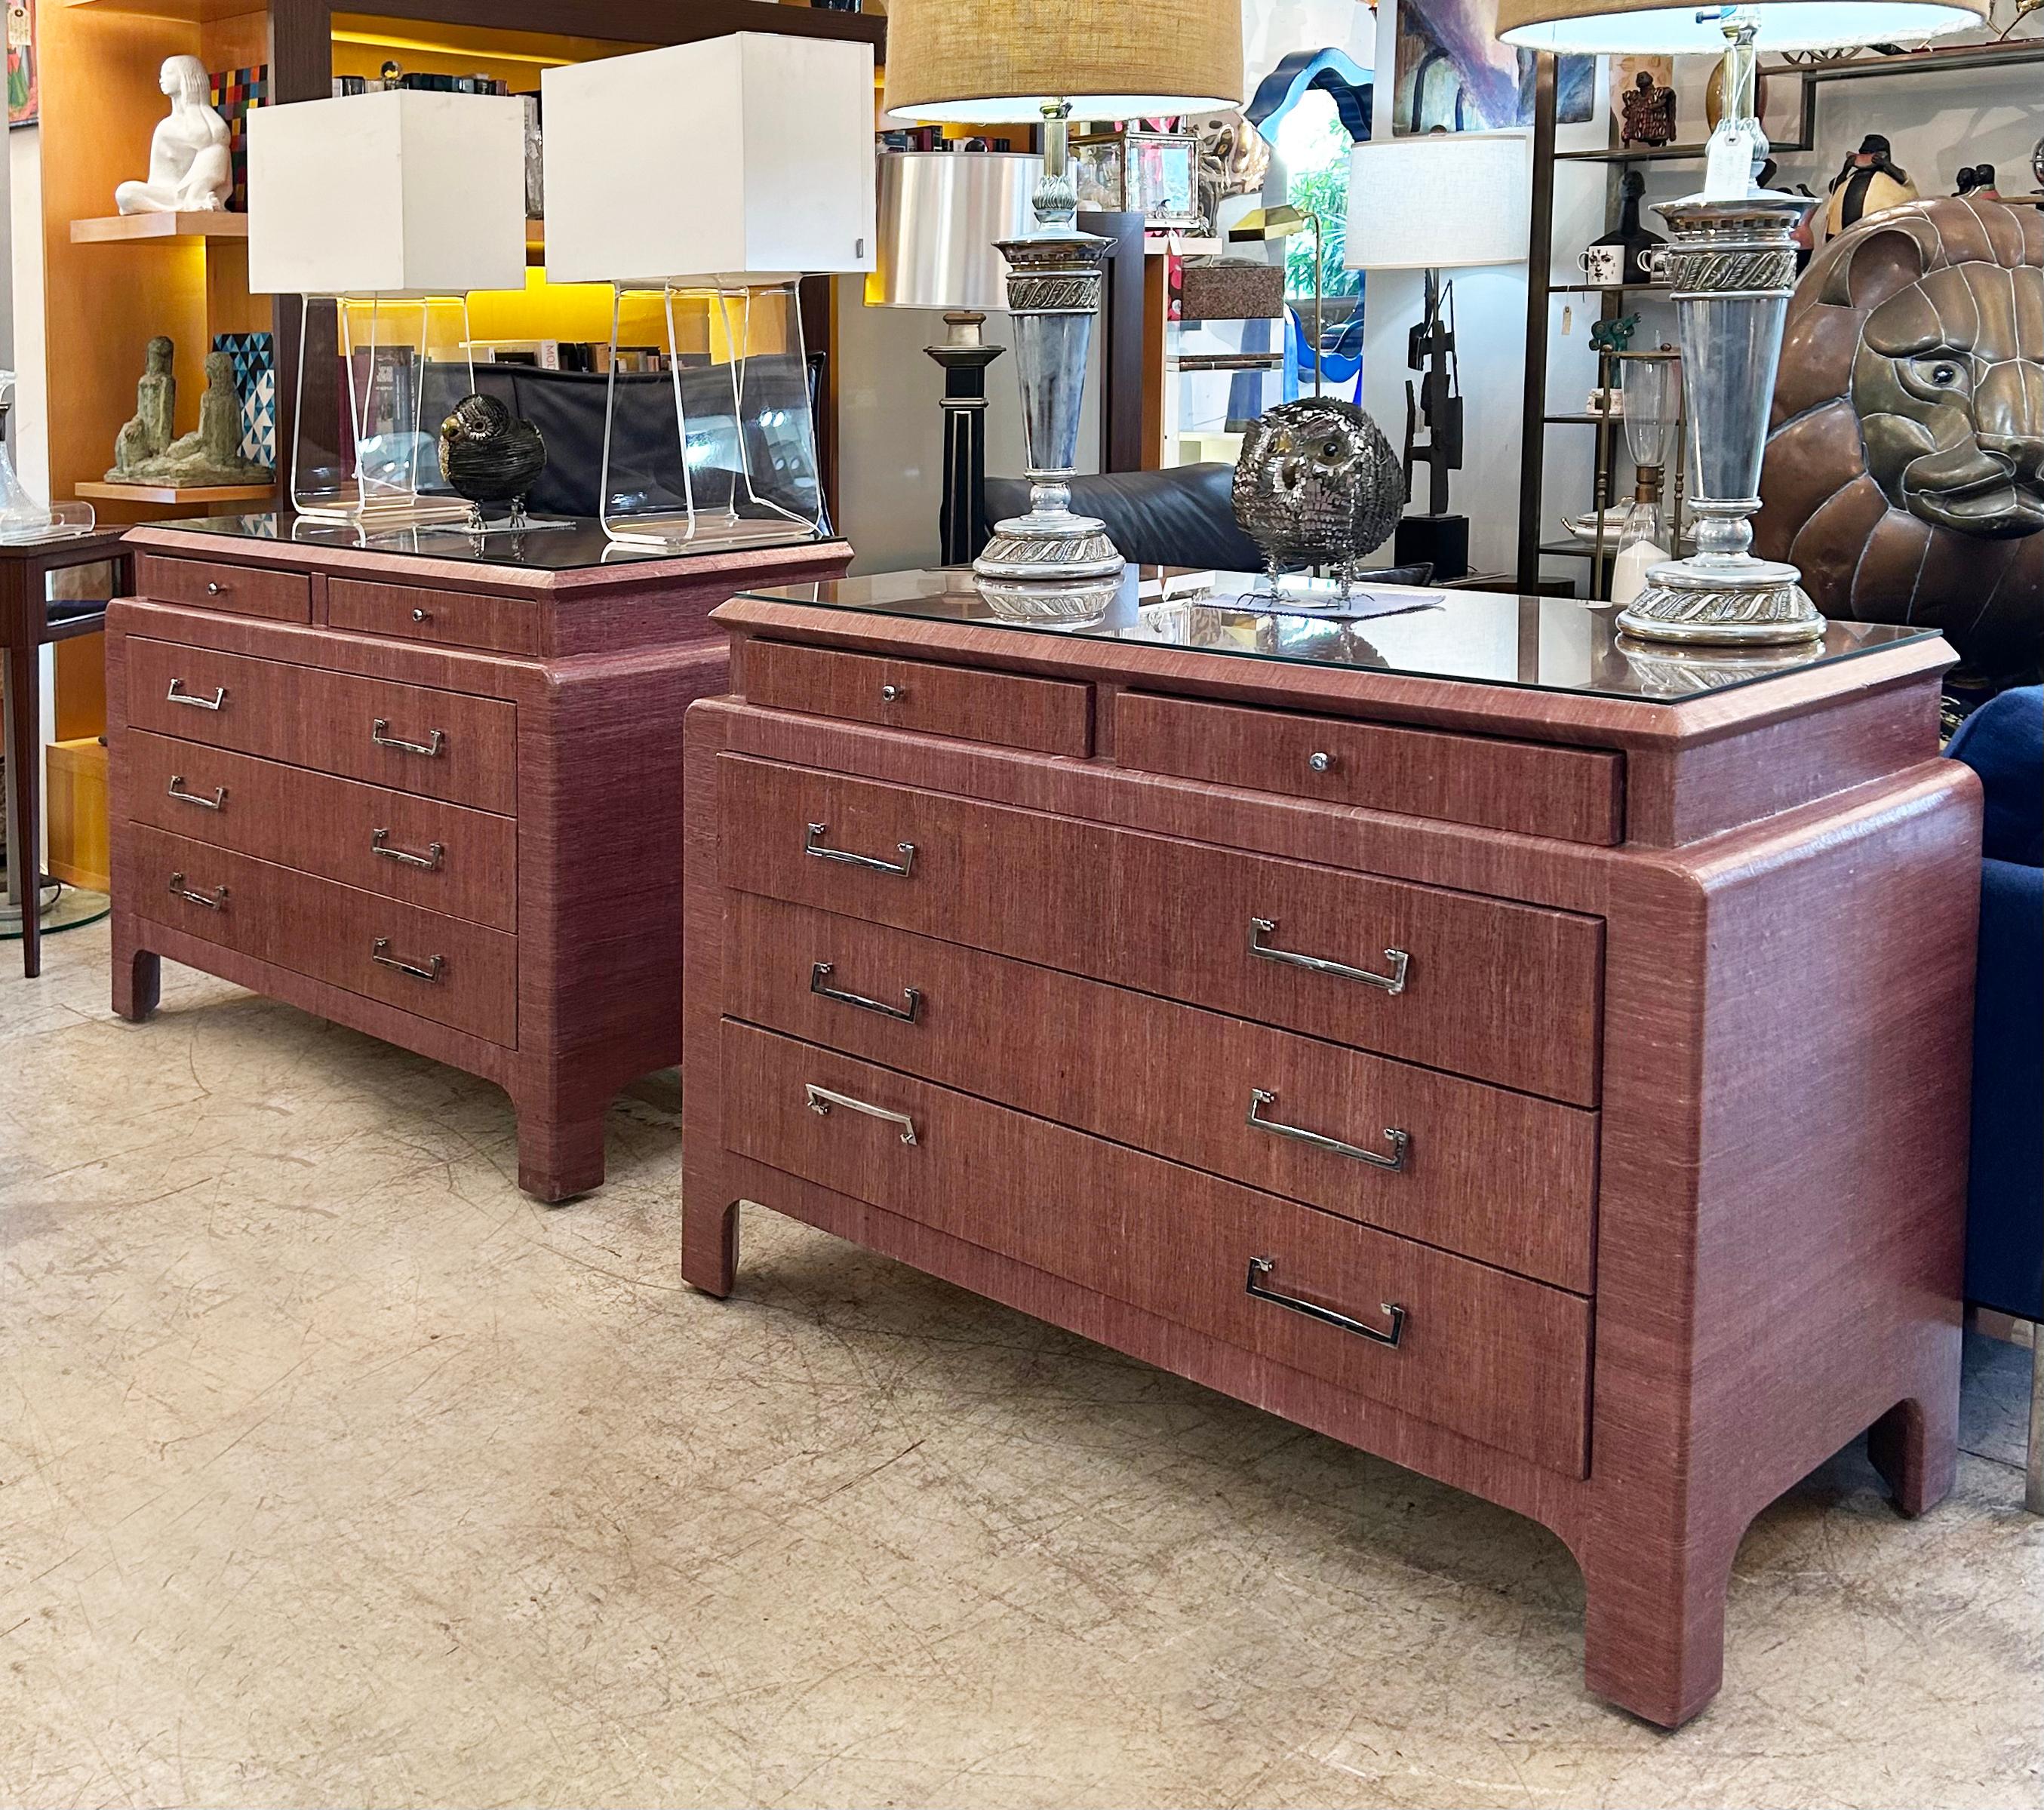 1970s Pair of Grasscloth Clad Chests of Drawers, Karl Springer Attributed 

Offered for sale is a pair of wonderful chests of drawers covered in plum-colored grasscloth. The chests have glass tops to protect the tops and are a recent acquisition